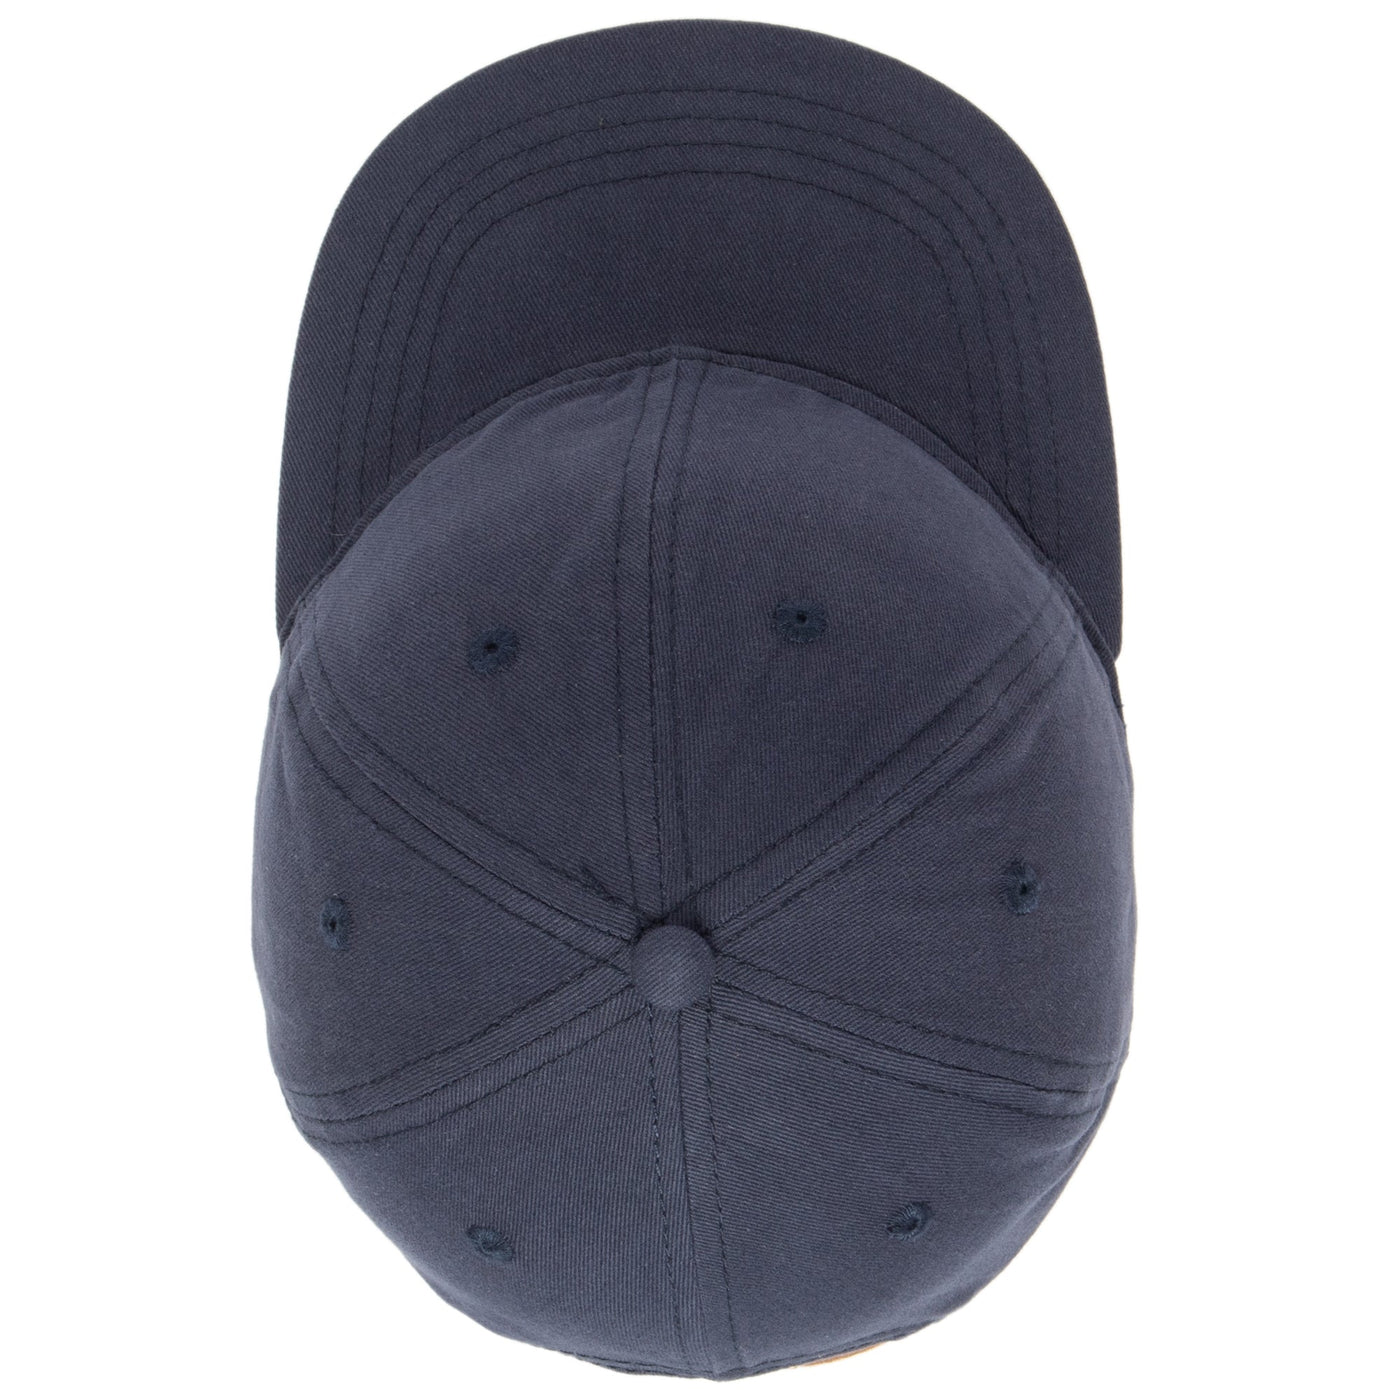 CAP - Women's Washed Ball Cap With Adjustable Leather Back